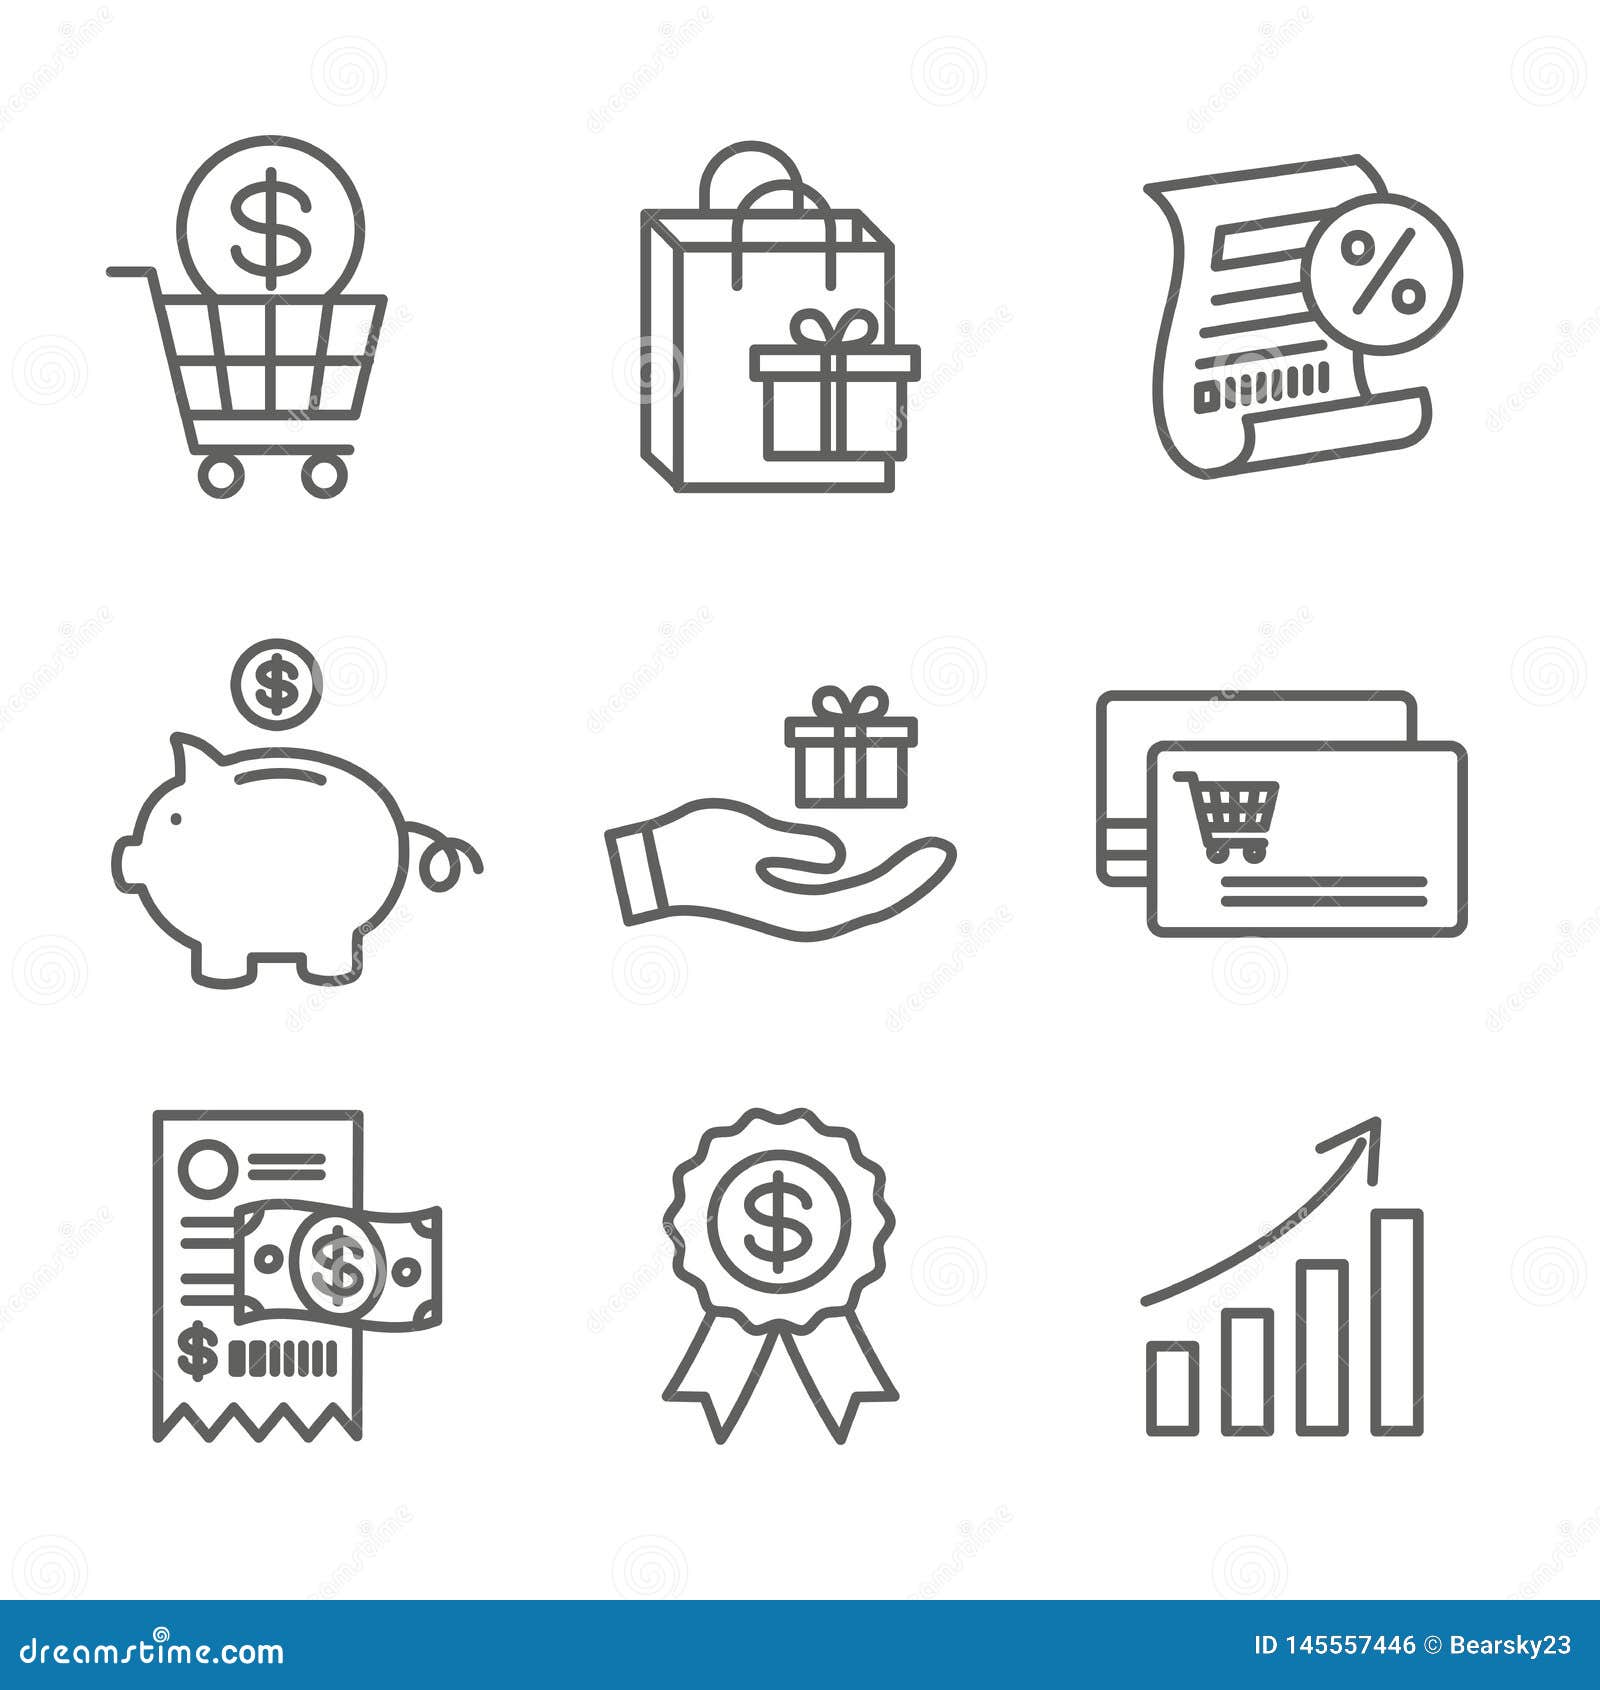 customer rewards icon set - shopping bag and discount images